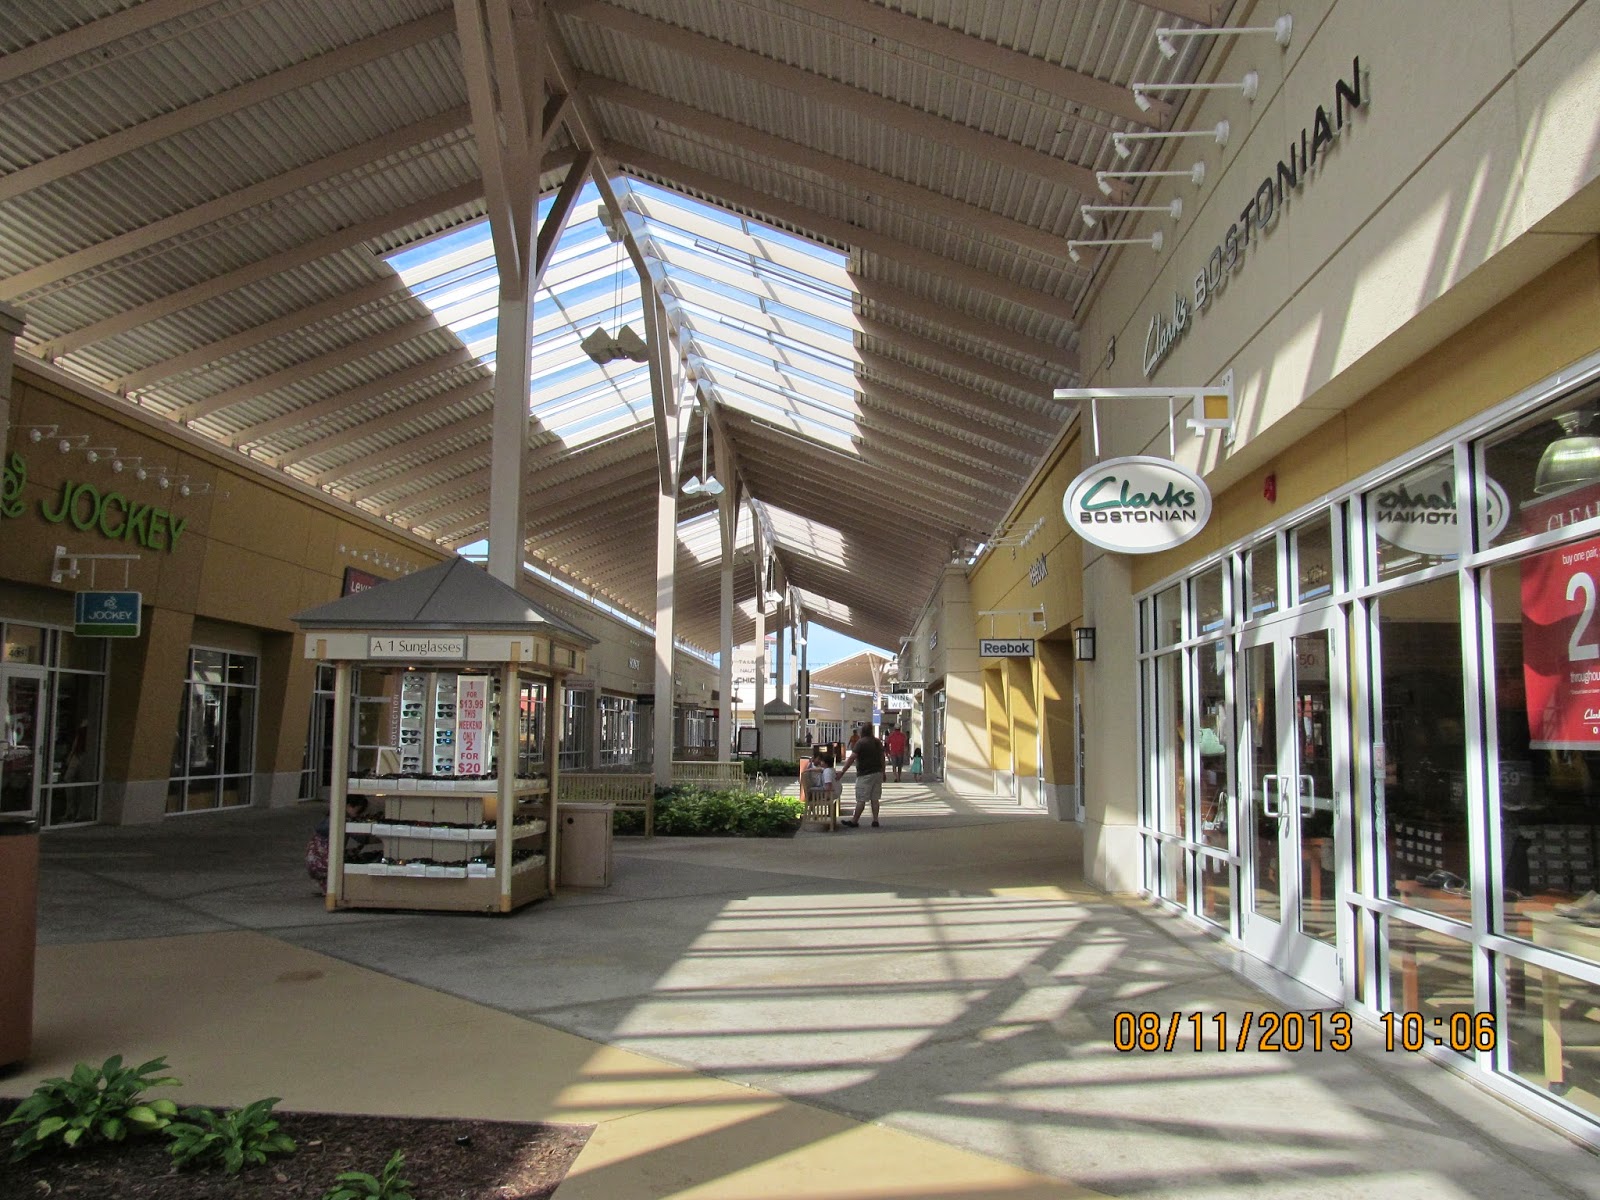 Trip to the Mall: Chicago Premium Outlets- (Aurora, IL)